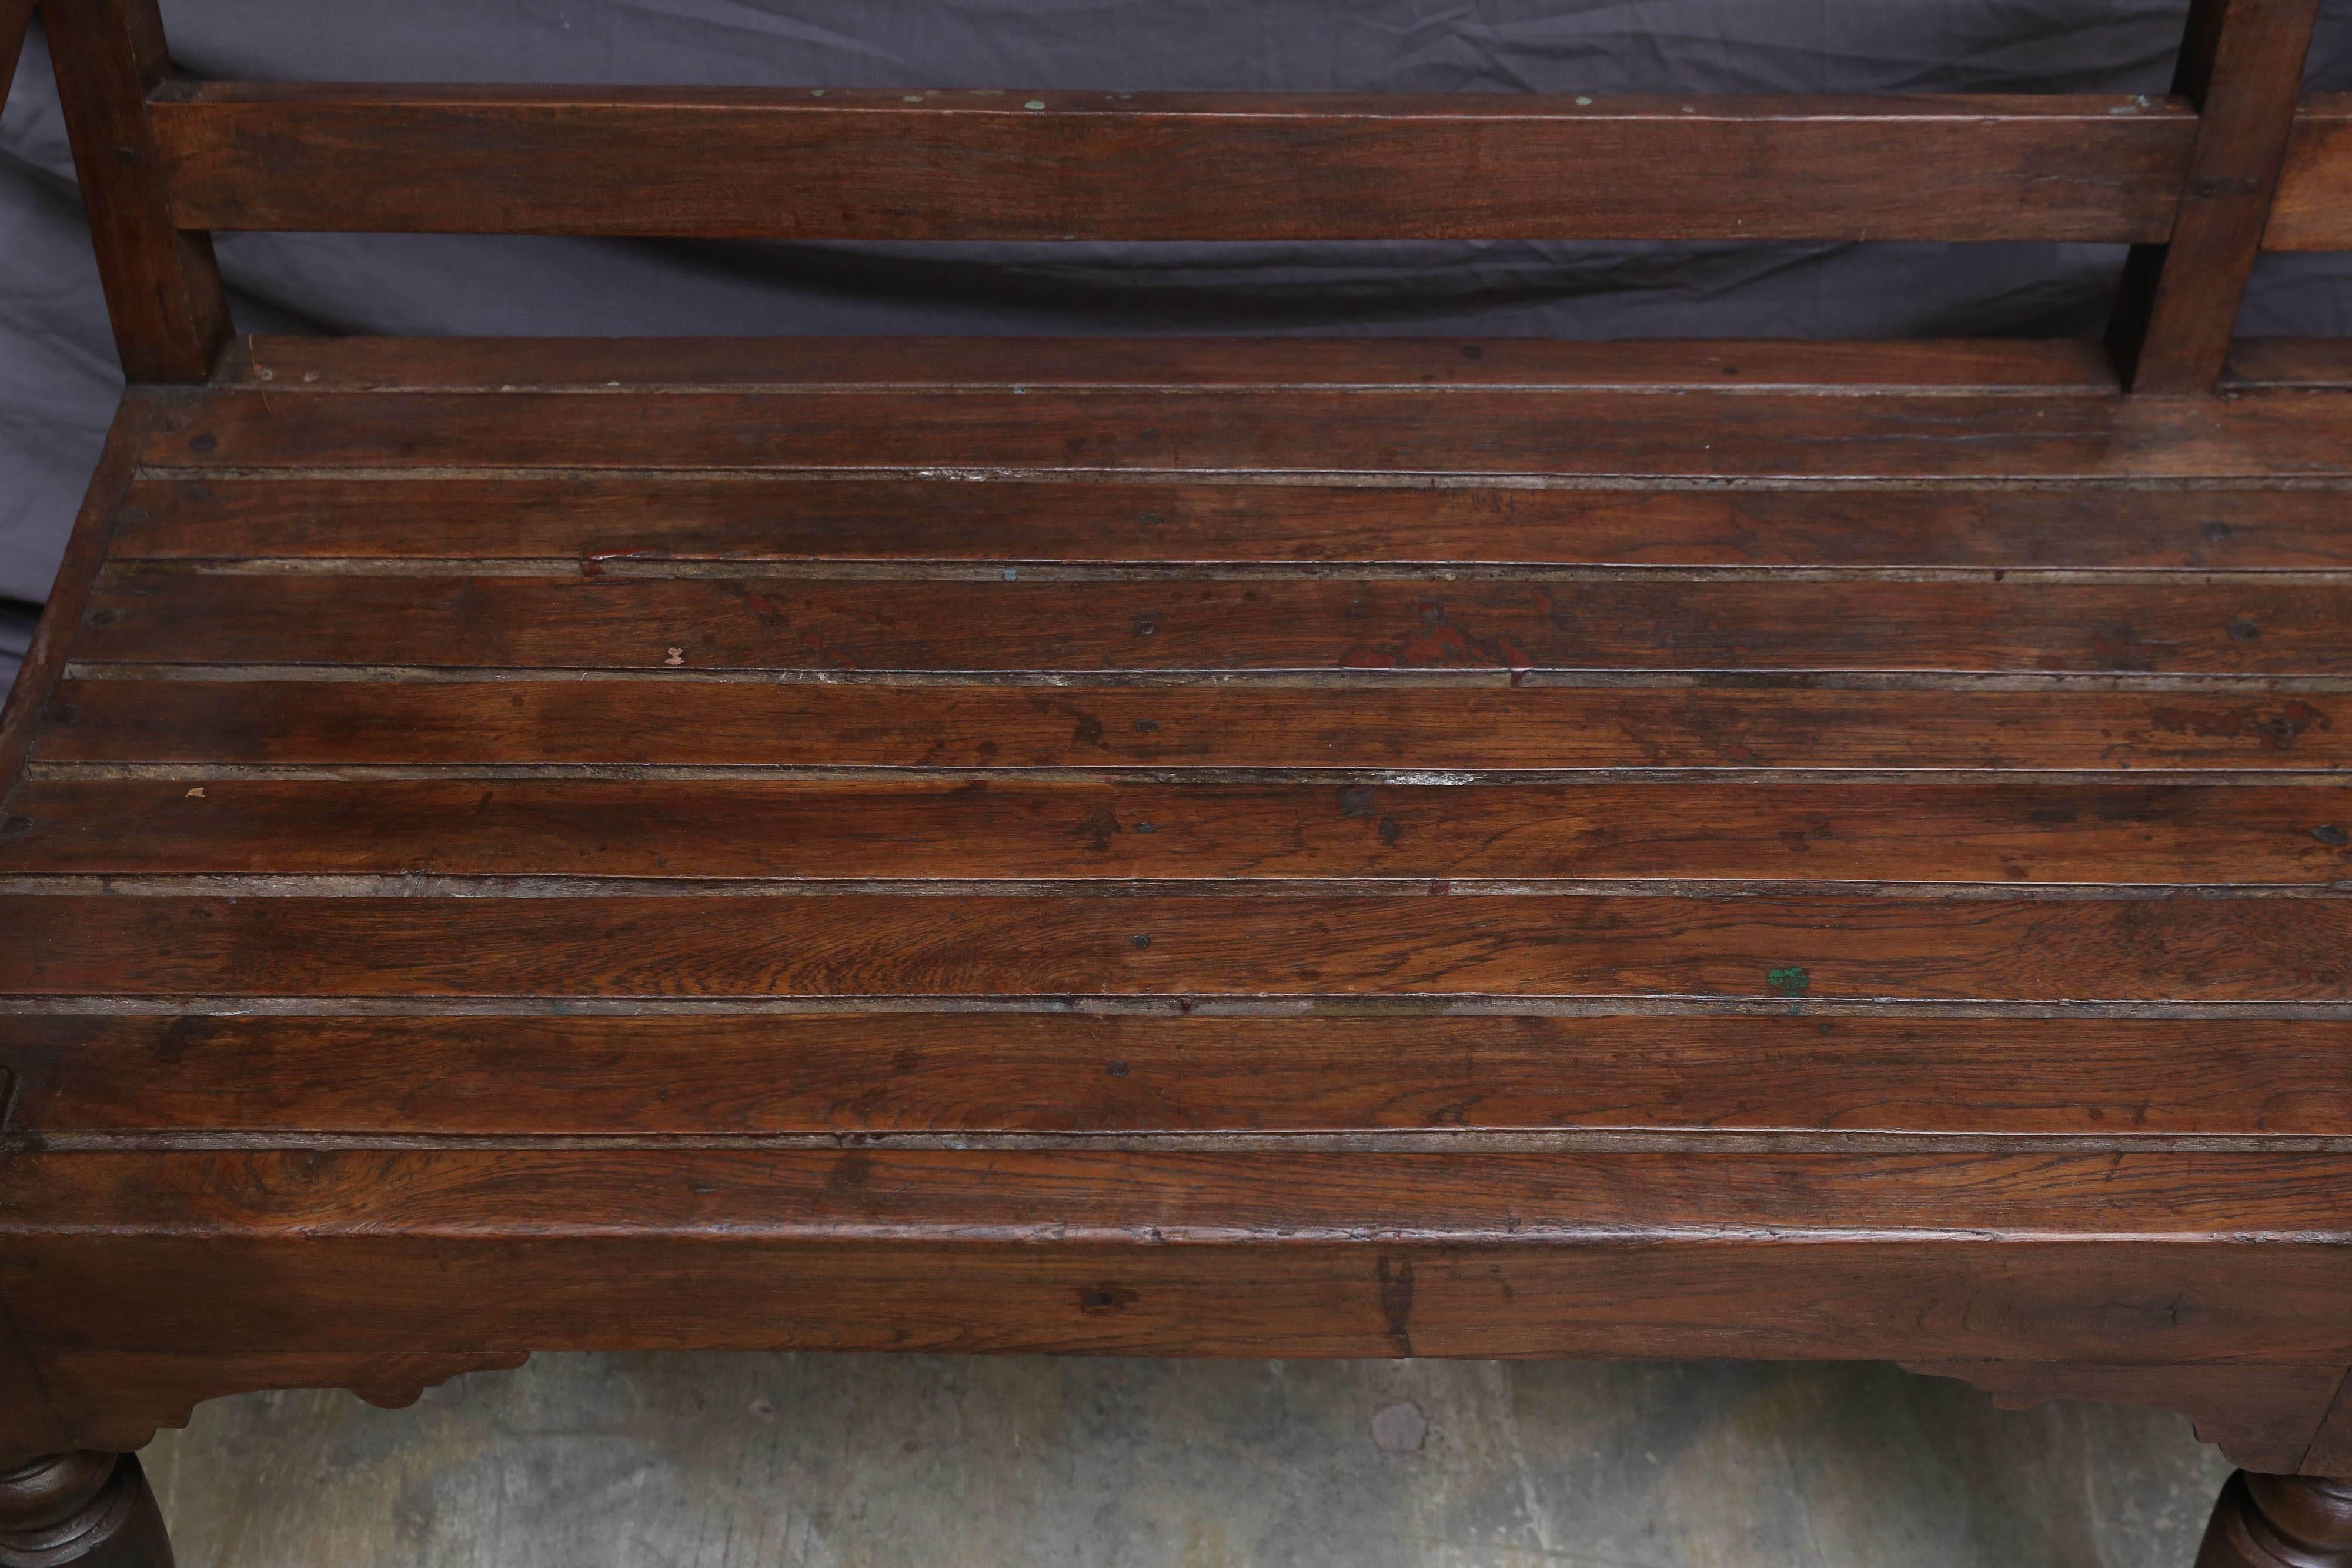 British Colonial Late 19th Century Solid Teak Wood Bench from a Colonial Tea Plantation